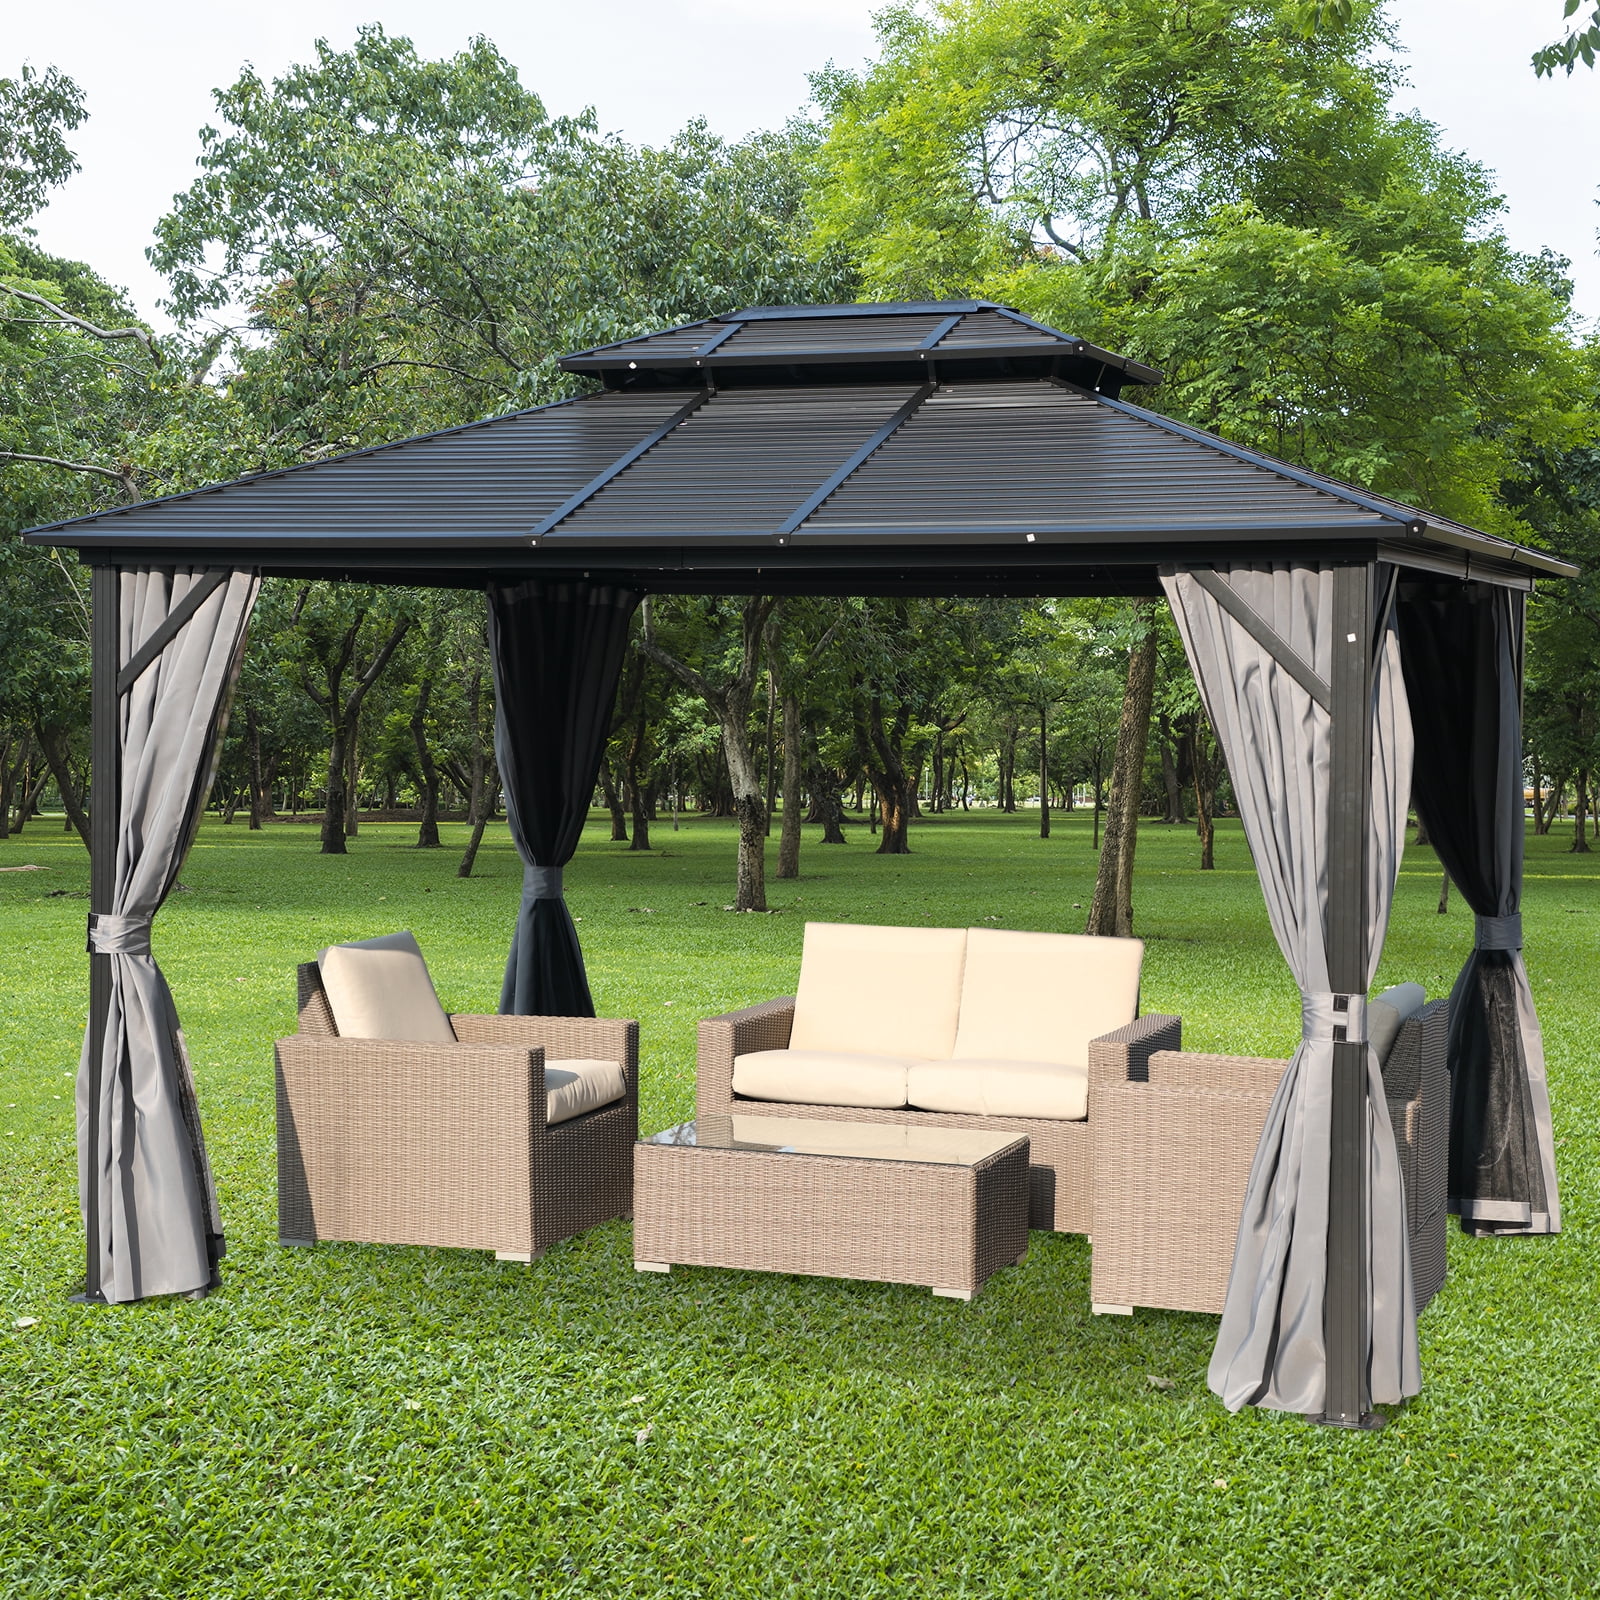 mosquito netting curtains for gazebo